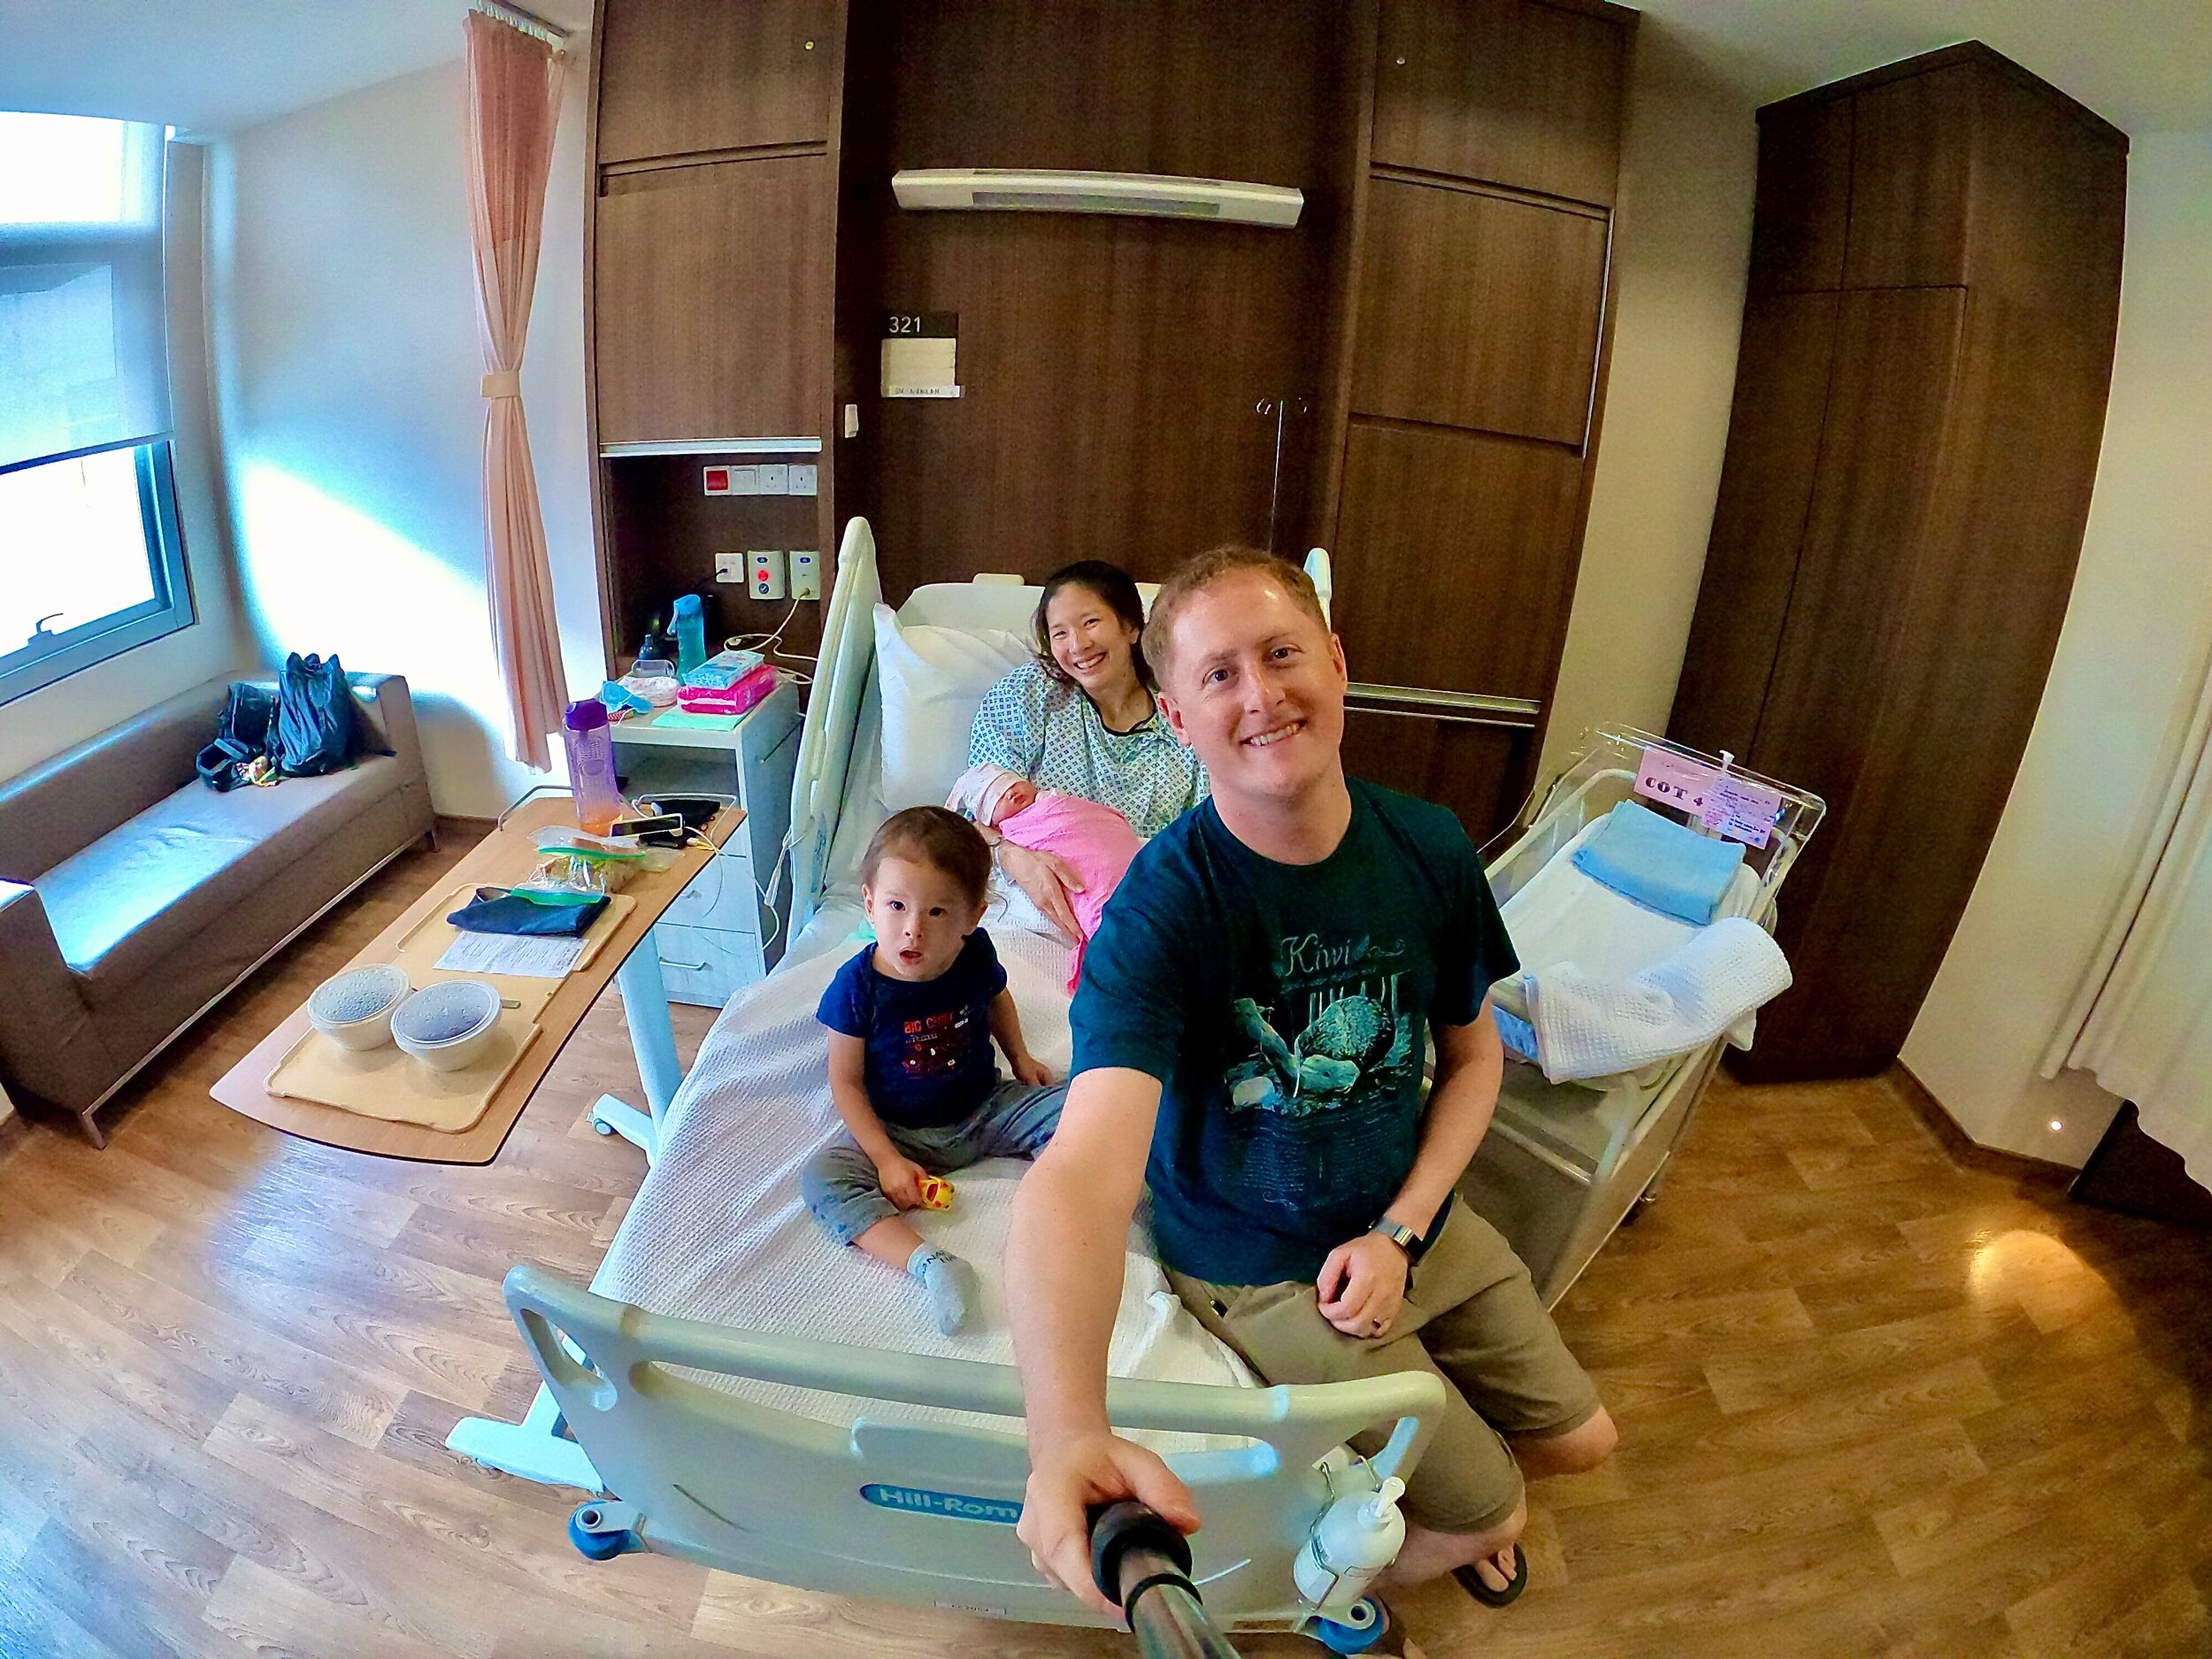 JOHOR BAHRU HAS A CHILDBIRTH EXPERIENCE WHERE YOU CAN EXPERIENCE